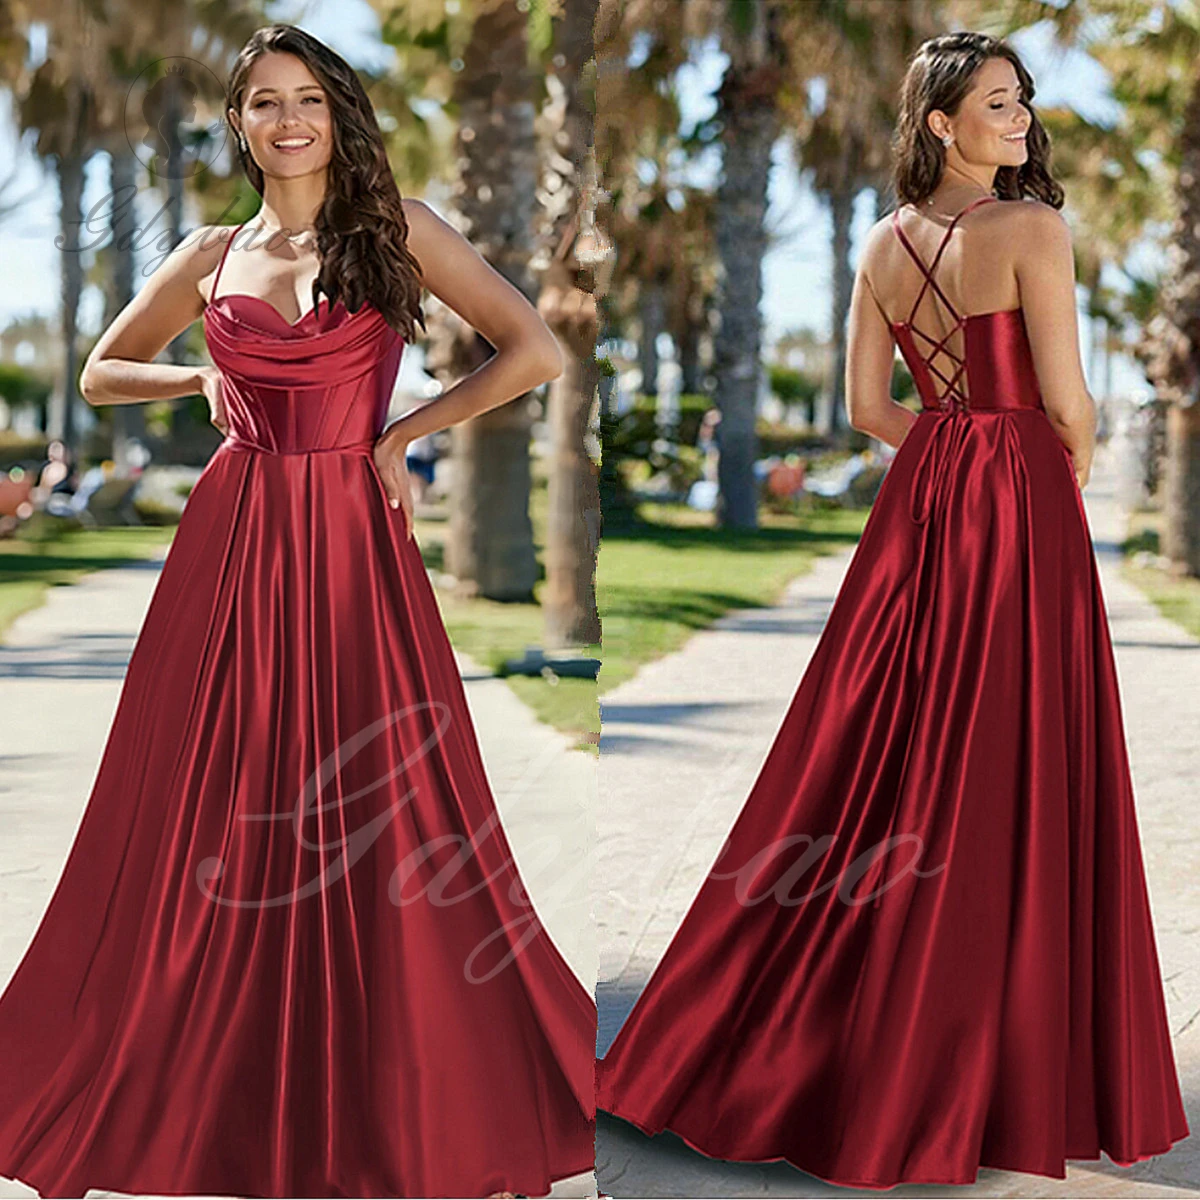 

Women’s Spaghetti Straps Cowl Neck Bridesmaid Dresses with Pockets Long Pleats Formal Dress